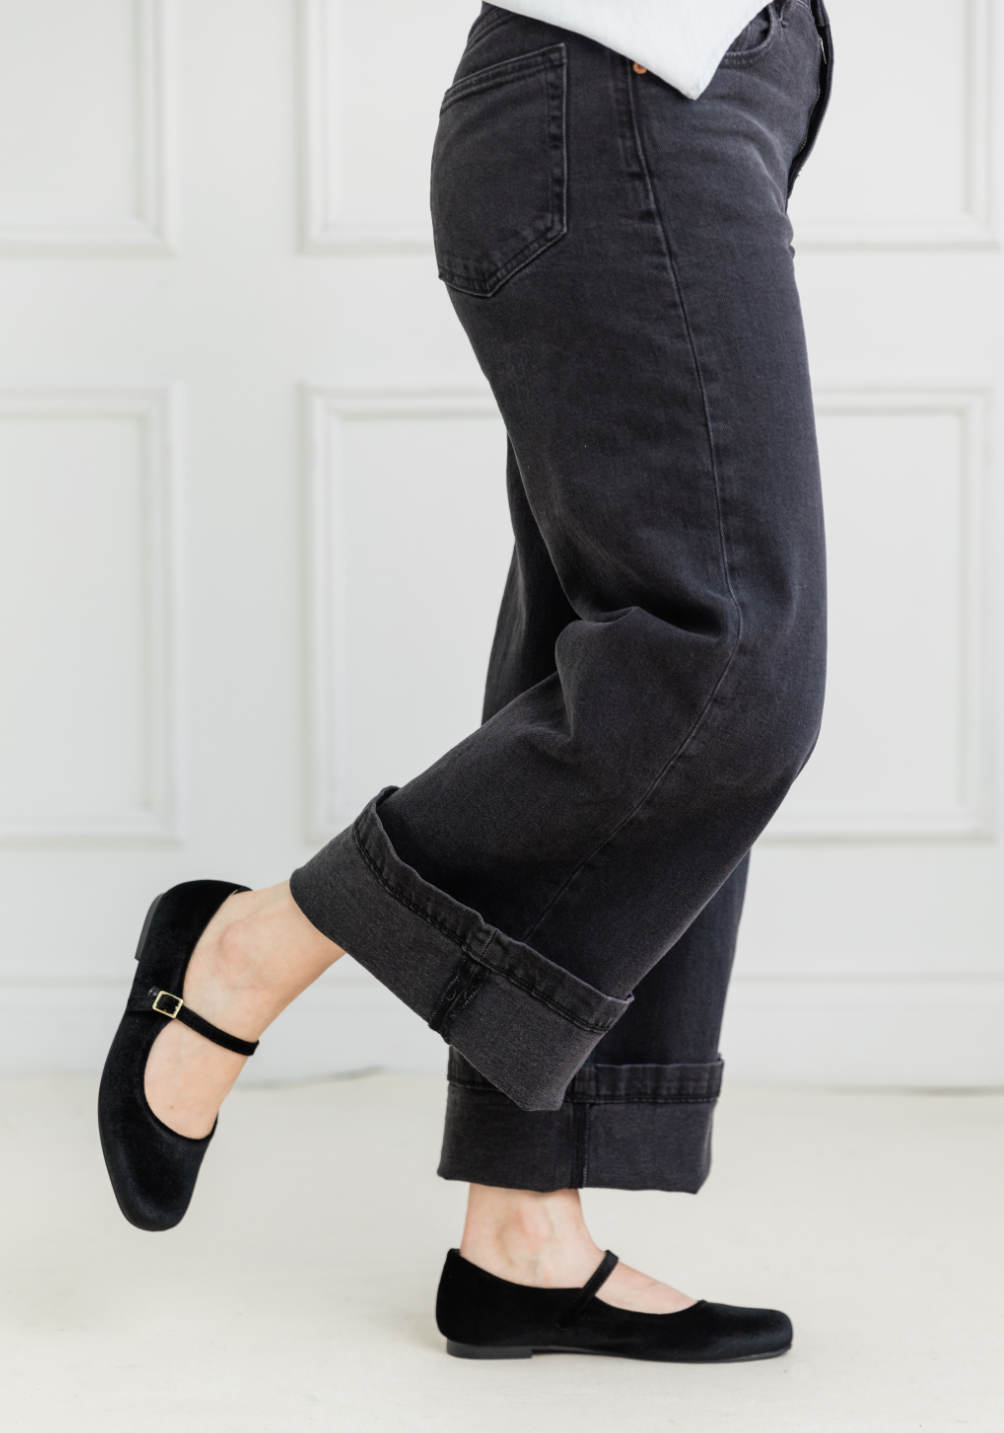 Cropped view of woman wearing cuffed wide leg jeans with ballerina flats.